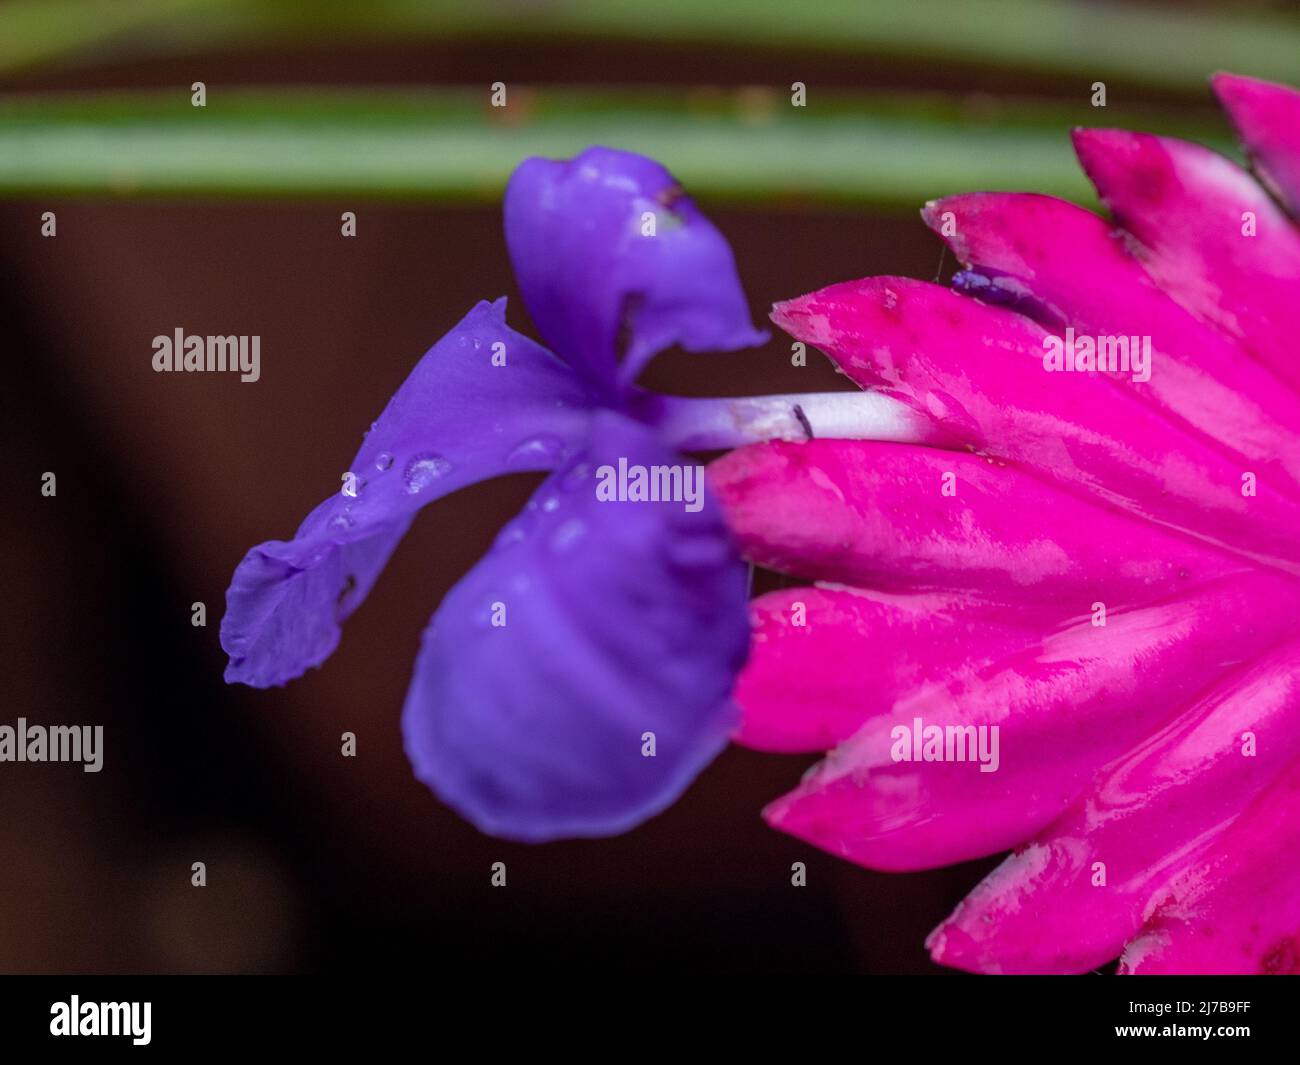 Pink Quill plant, Macro of wet Hot Pink Bracts Bromelliad, Tillandsia Cyanea, with a single purple flower blooming on the end, Australian garden Stock Photo